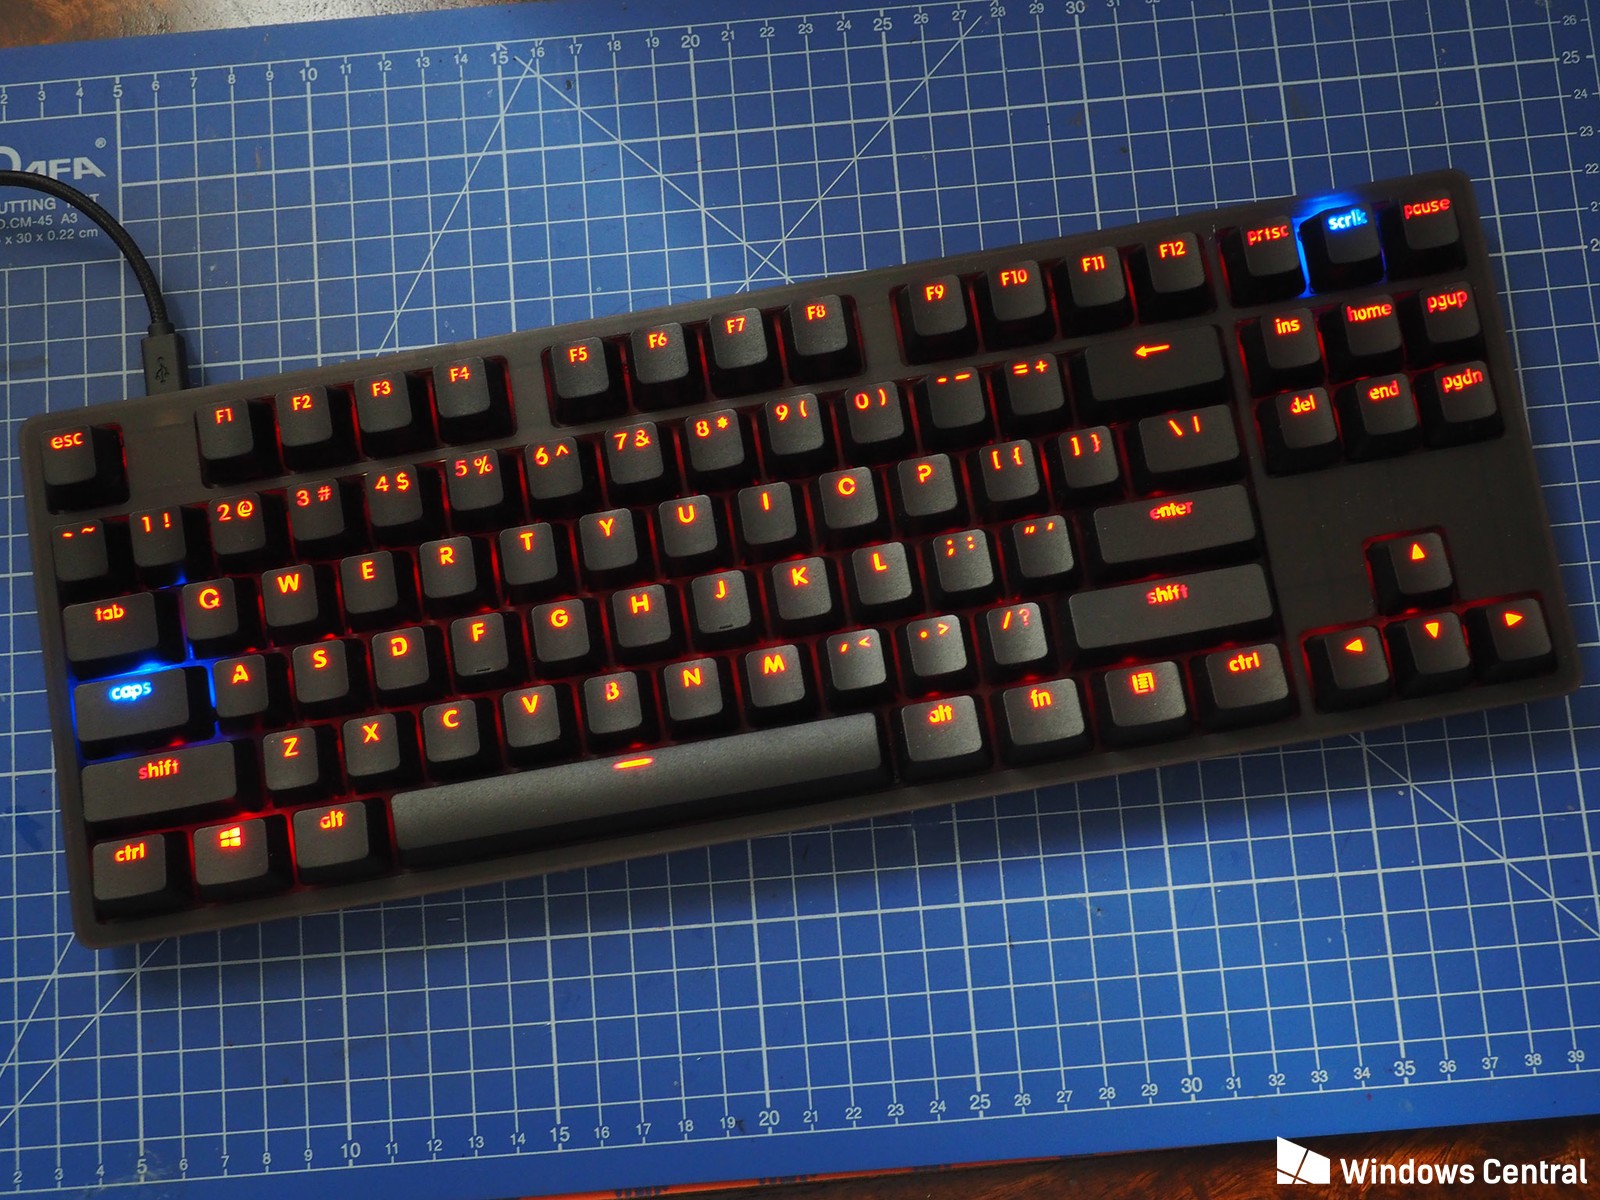 Xiaomi made a $100 mechanical keyboard with Cherry MX switches, and ...